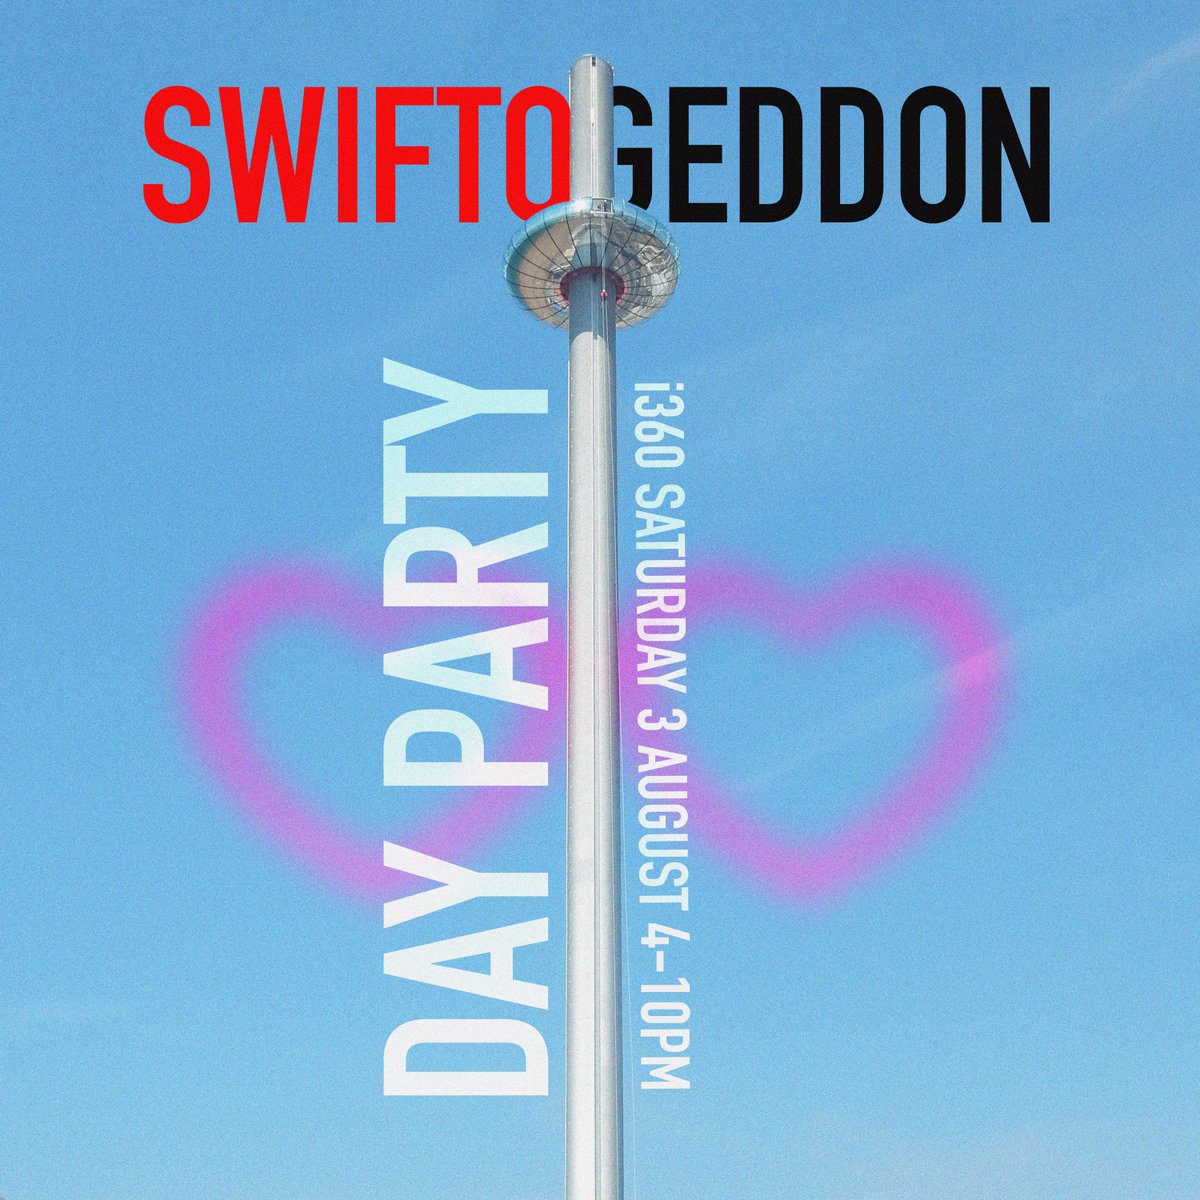 Delighted to announce that we will be heading to Brighton's i360 for a summer beachside day party!

On 3 August - the Saturday of Brighton Pride Weekend - we will be taking over the outside upper deck of the i360, located on Brighton Beach - for six solid hours of Taylor Swift!